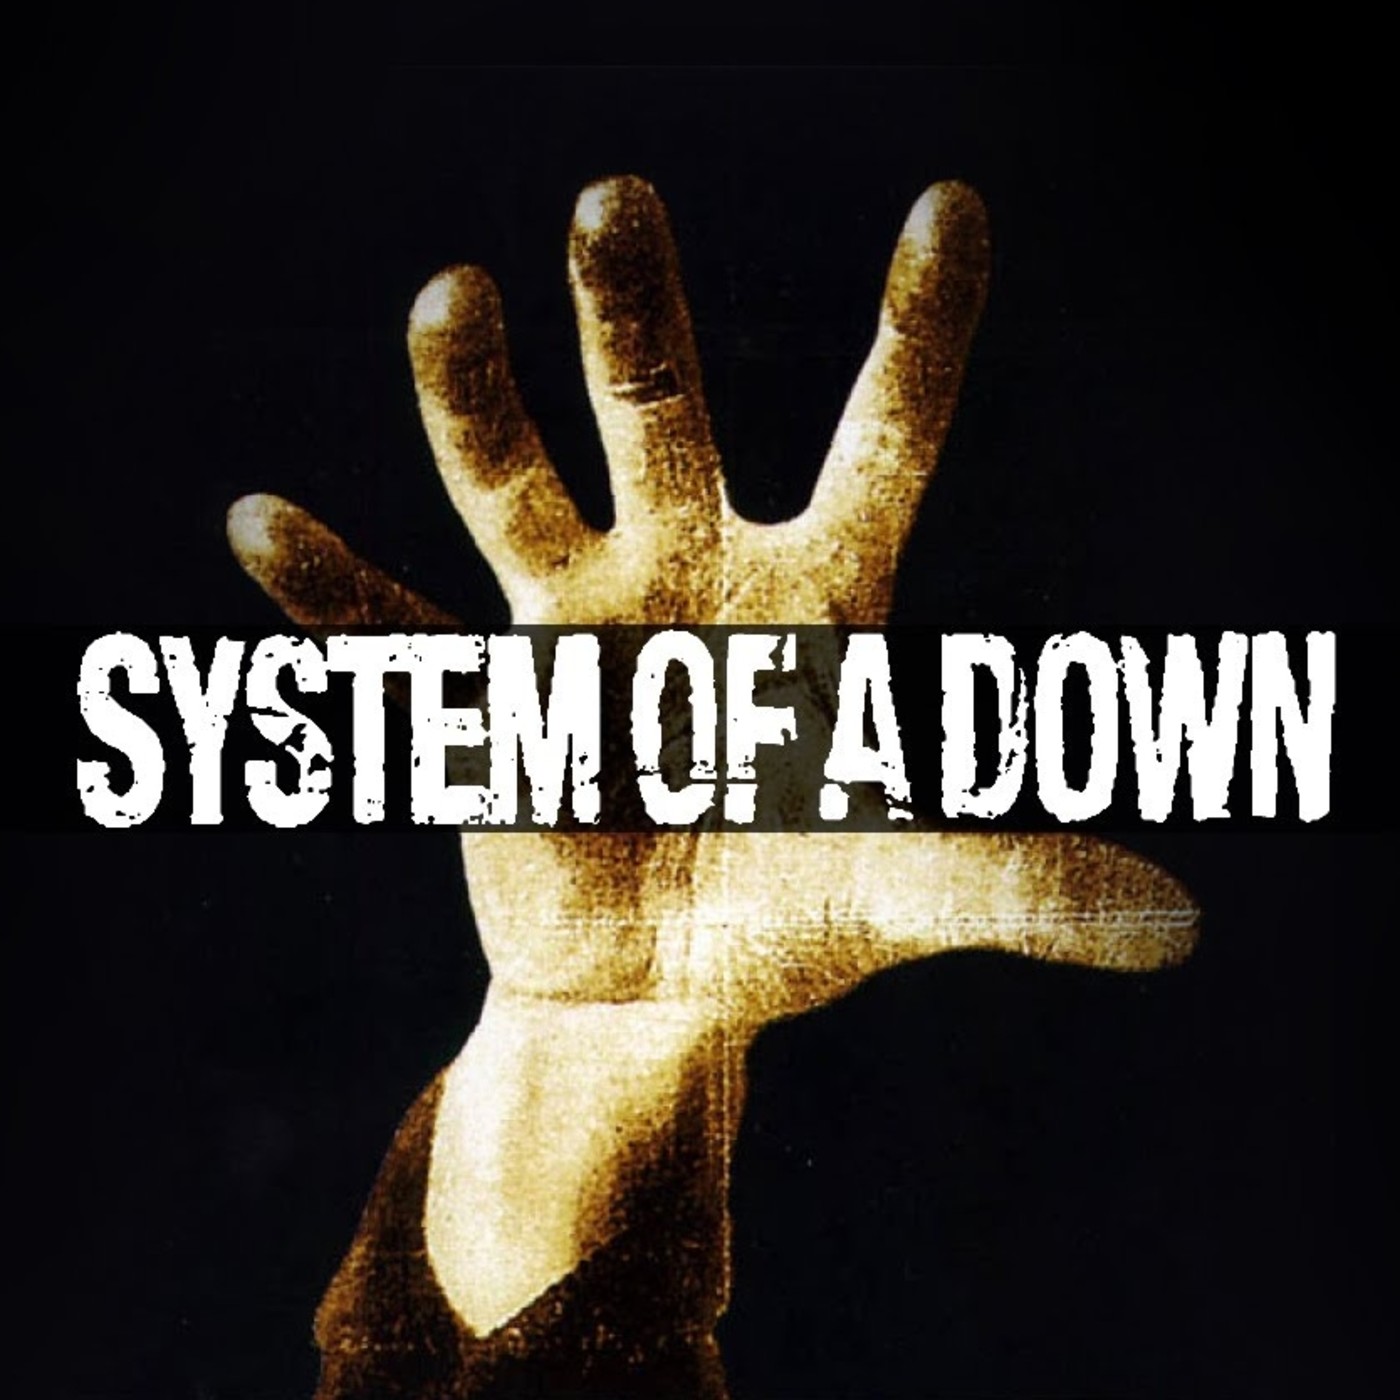 system of a down chop suey download free mp3